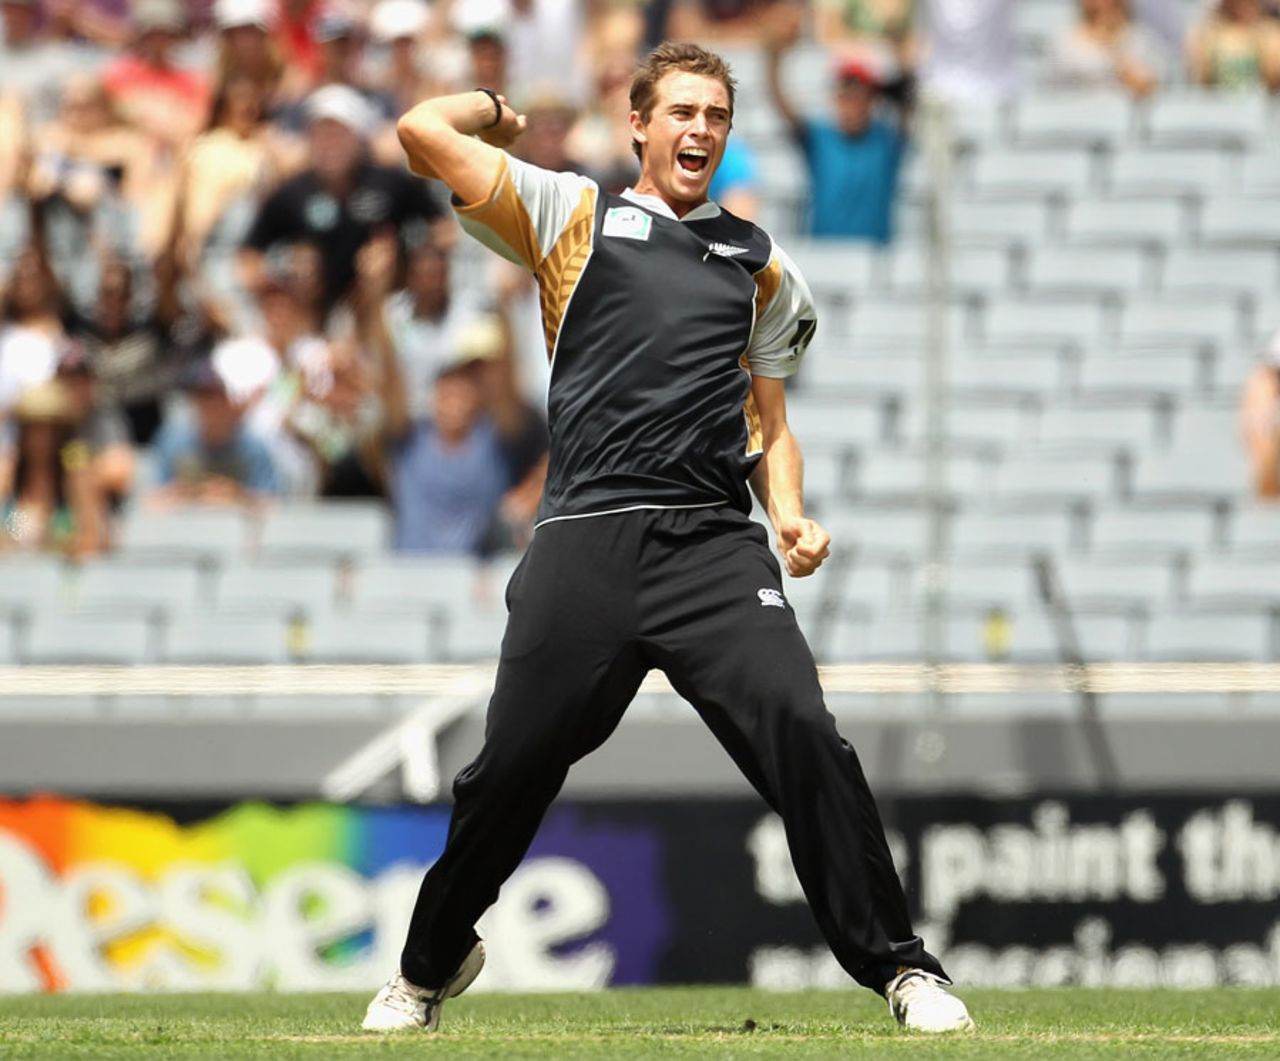 Tim Southee is ecstatic after completing his hat-trick, New Zealand v Pakistan, 1st Twenty20, Auckland, December 26, 2010